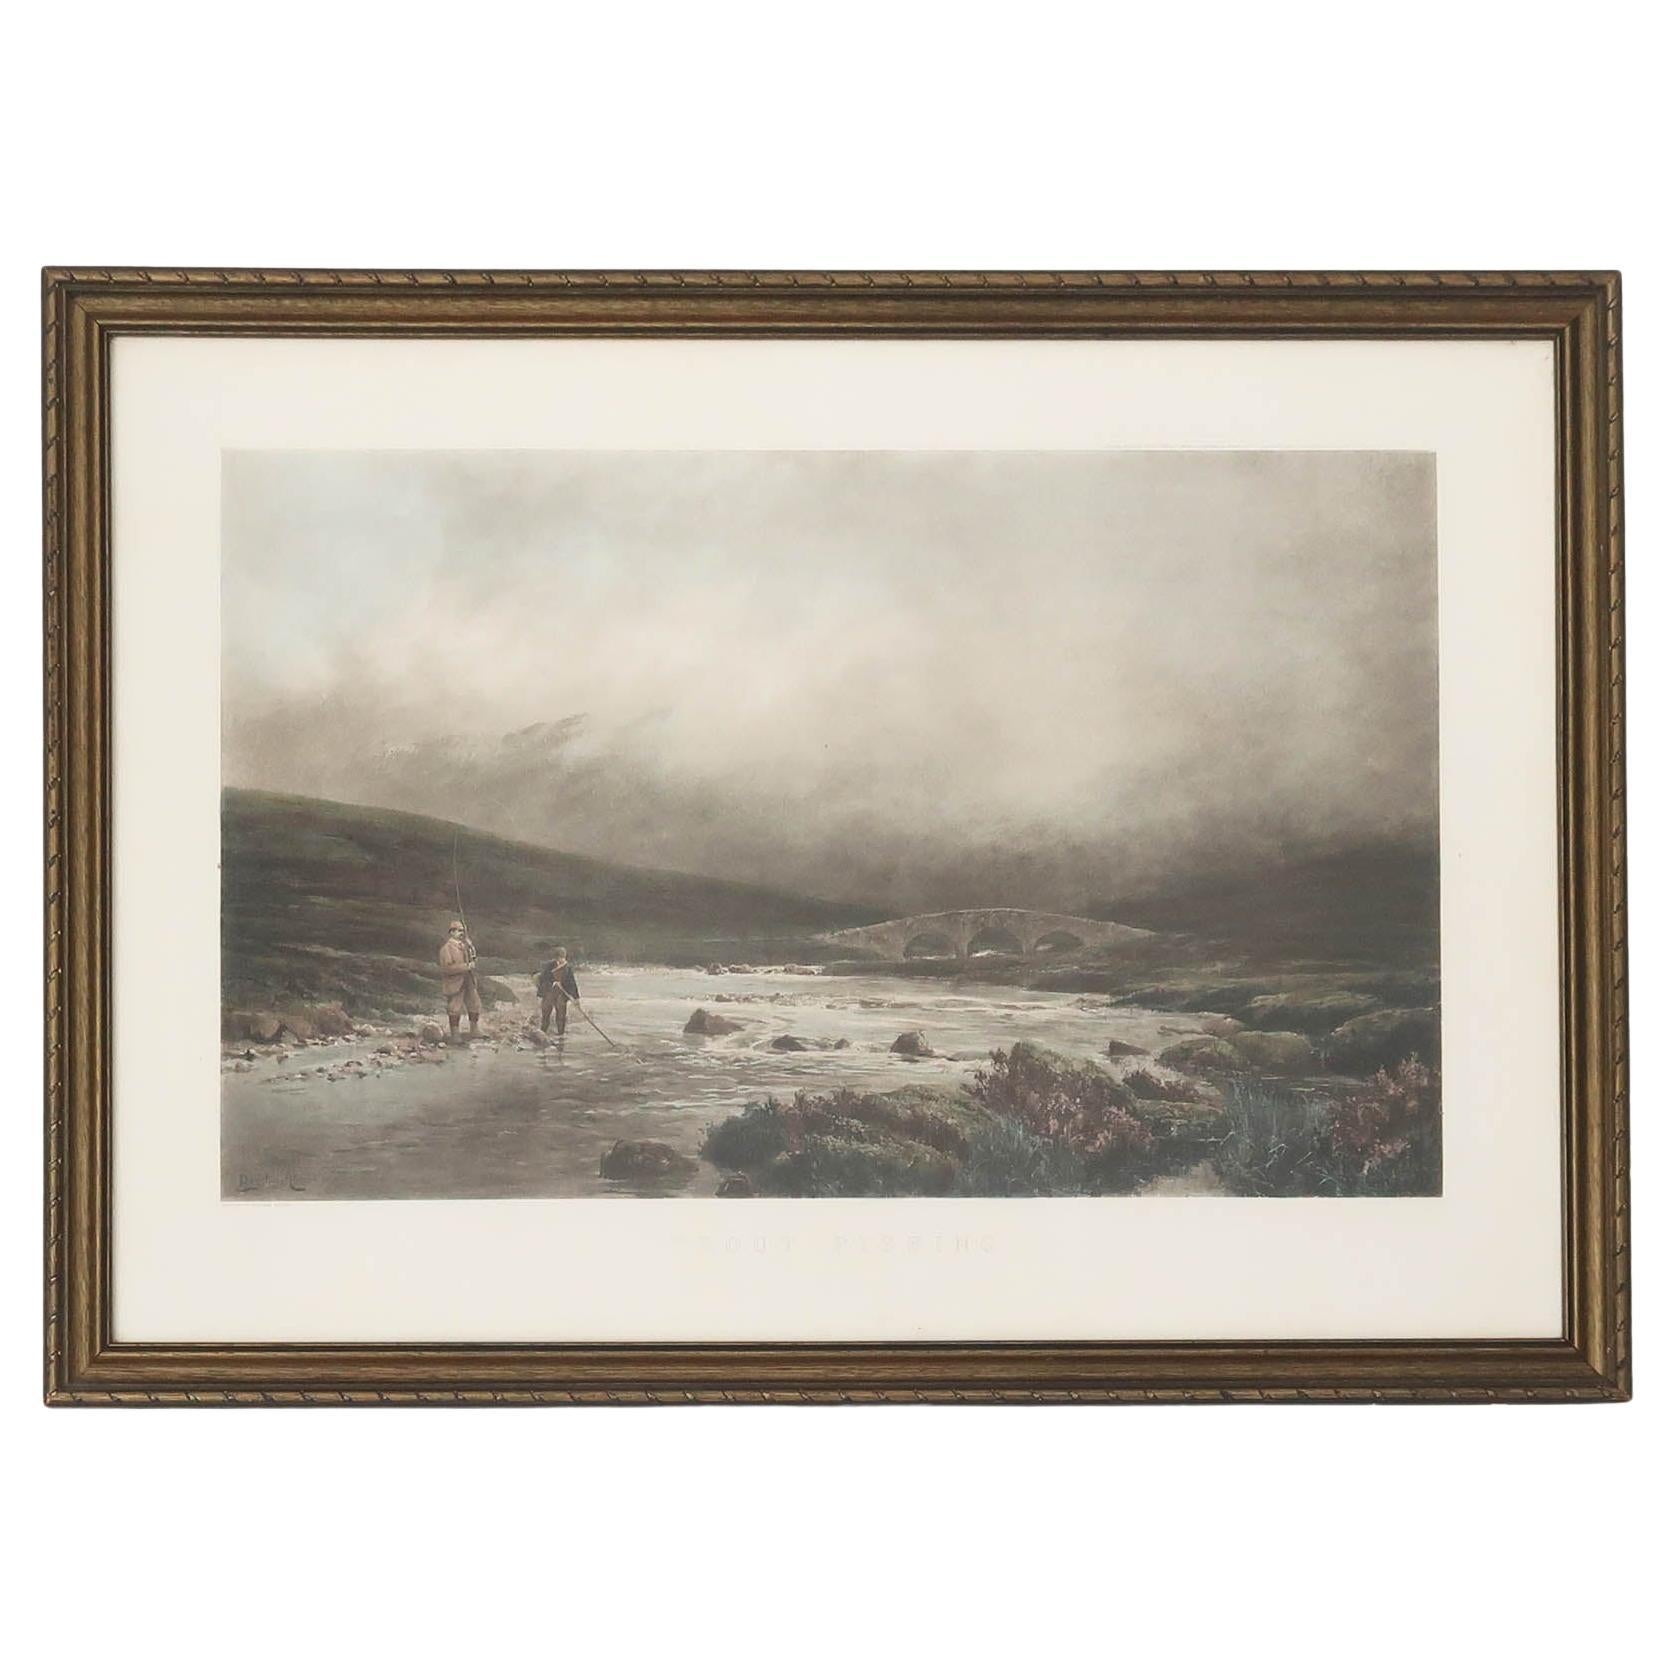 Trout Fishing in Scotland, Antique Print After Douglas Adams, Dated 1893